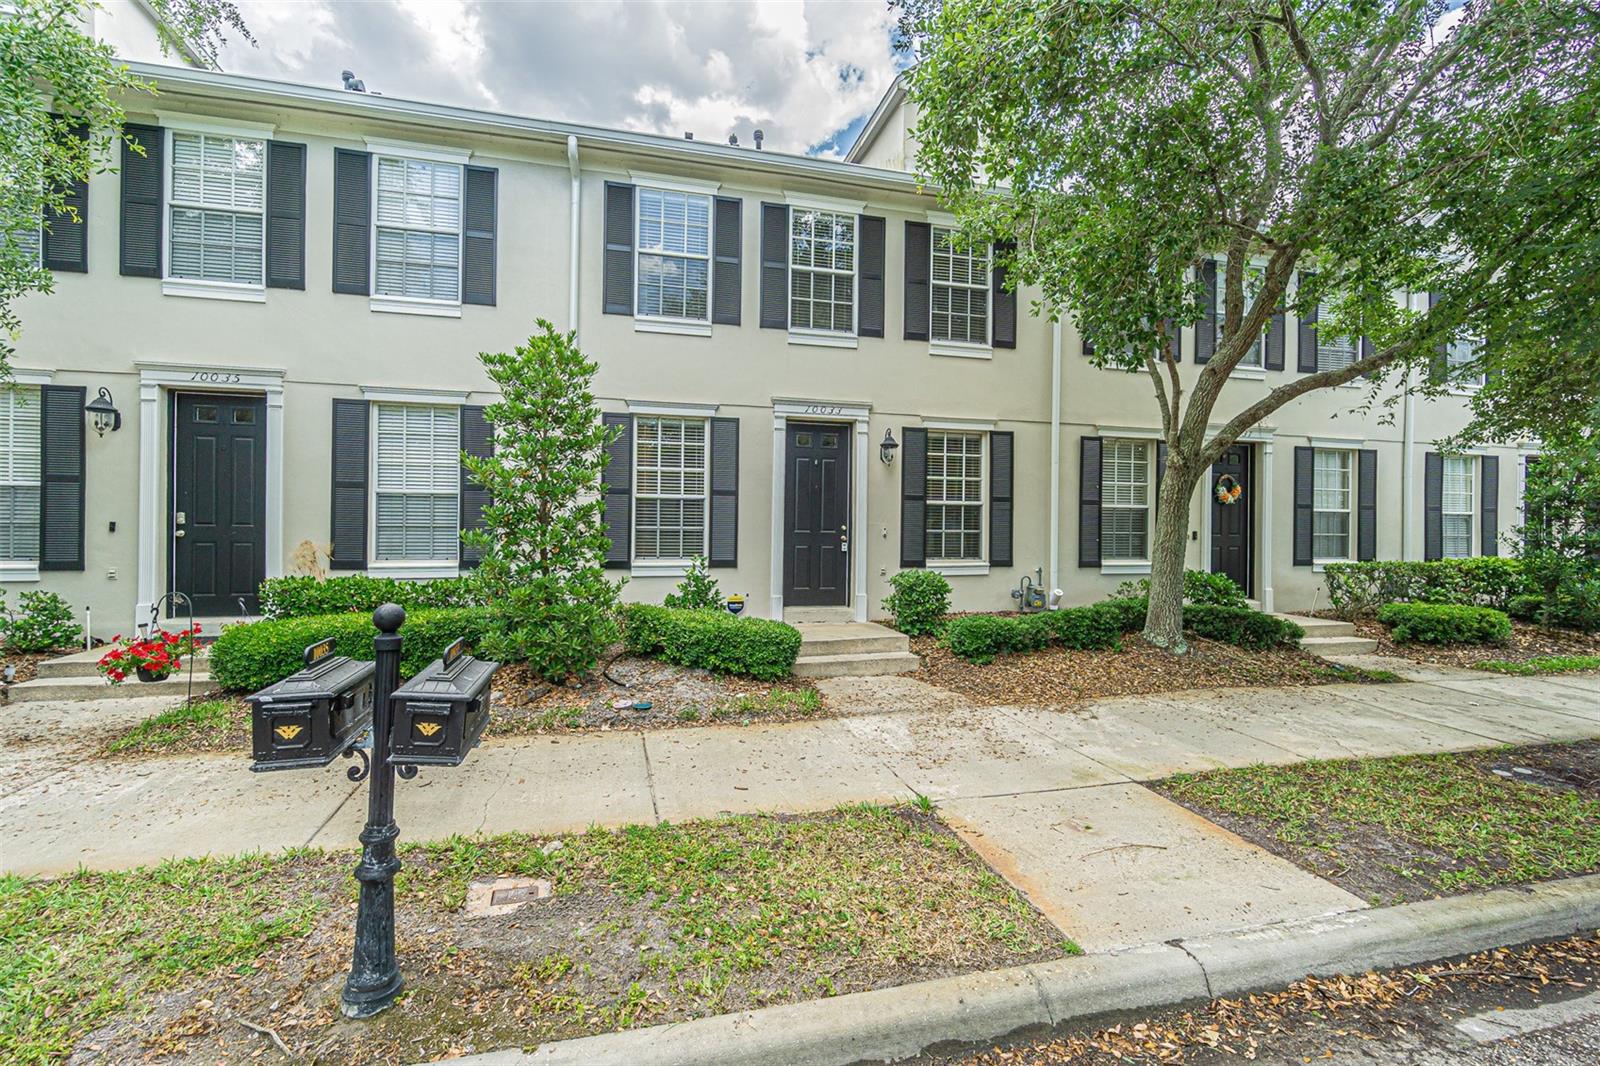 View TAMPA, FL 33626 townhome